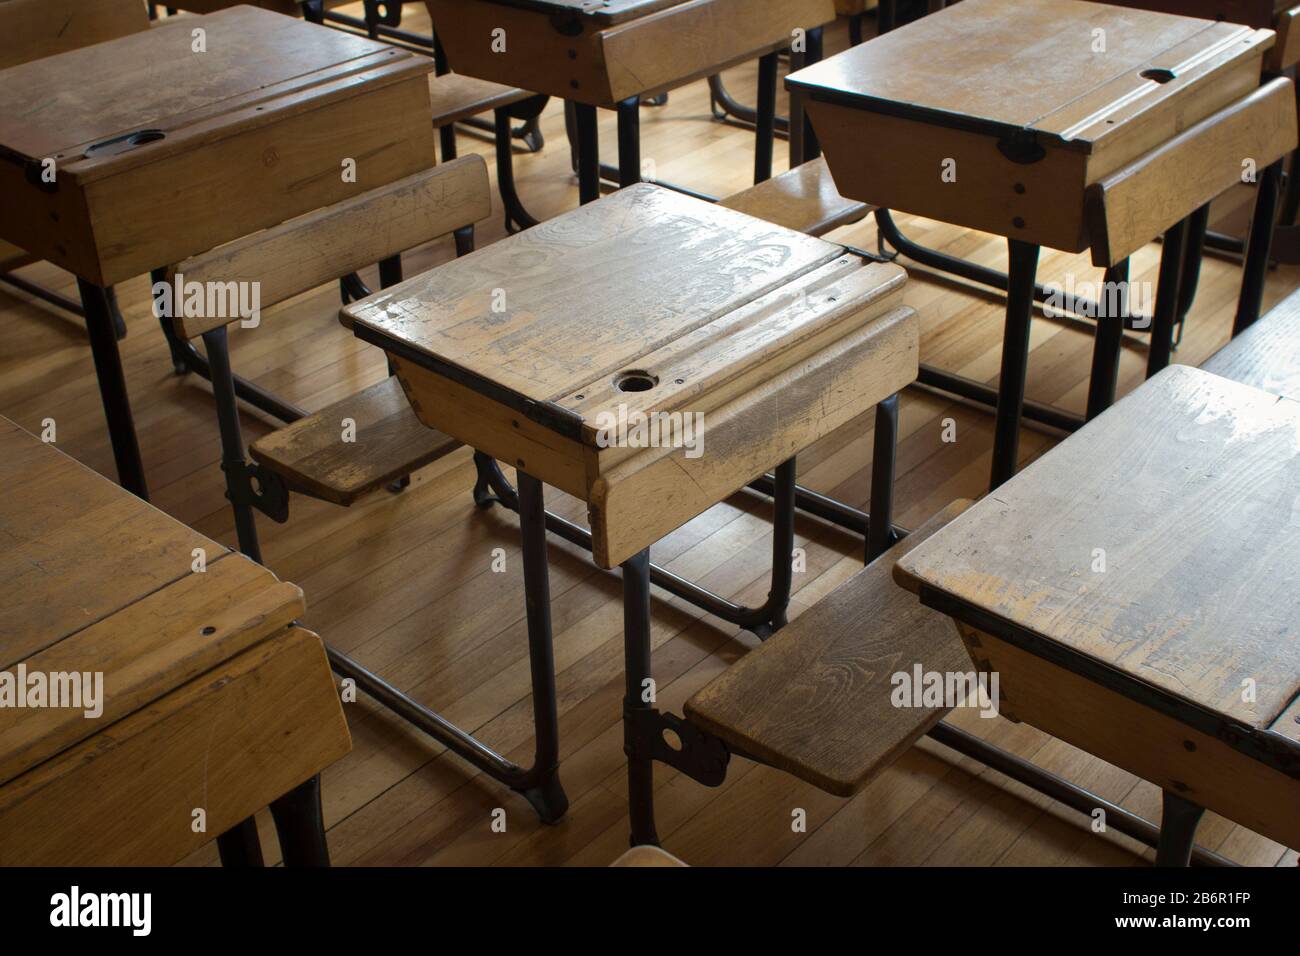 Rows Of Old Fashioned School Desks In A Classroom In Day Light